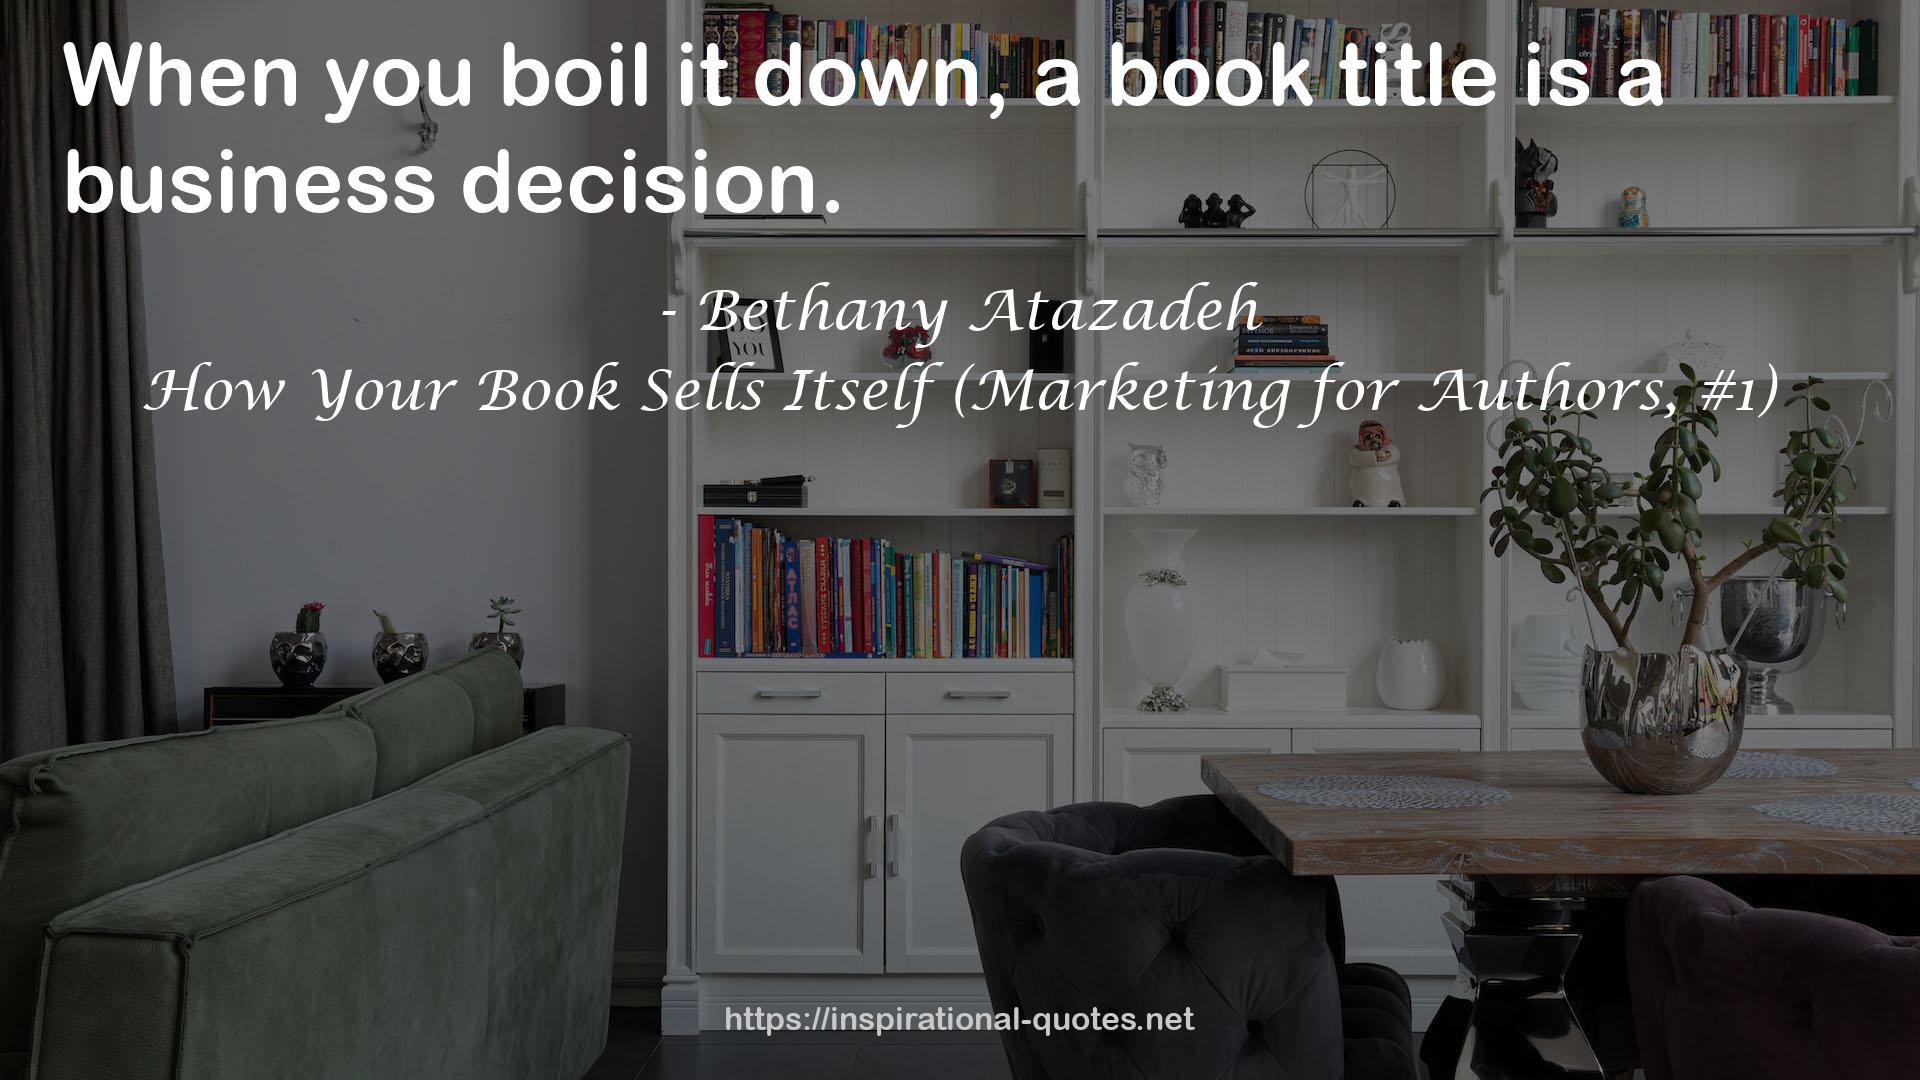 How Your Book Sells Itself (Marketing for Authors, #1) QUOTES